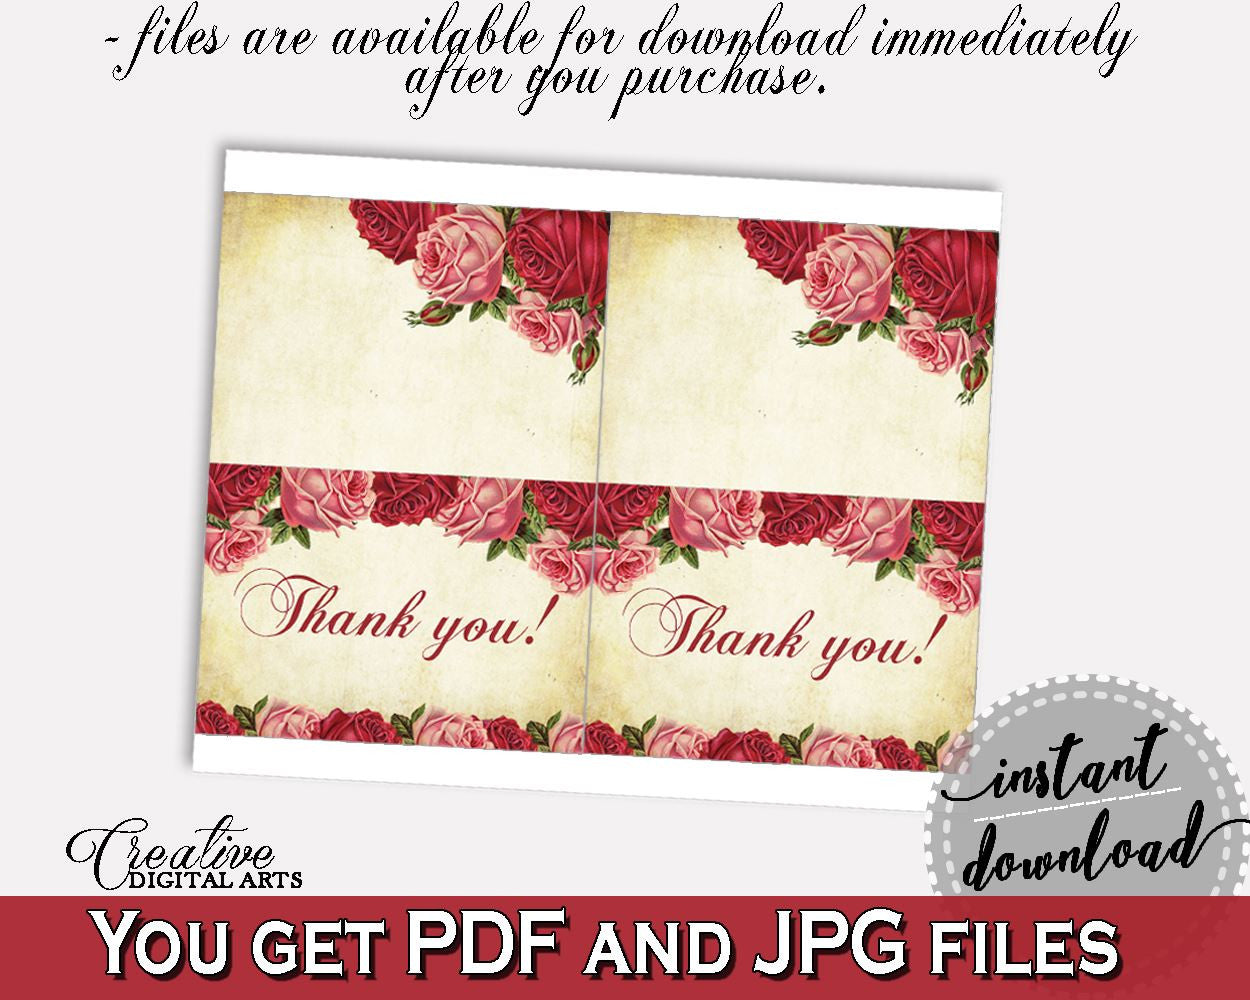 Thank You Card Bridal Shower Thank You Card Vintage Bridal Shower Thank You Card Bridal Shower Vintage Thank You Card Red Pink digital XBJK2 - Digital Product